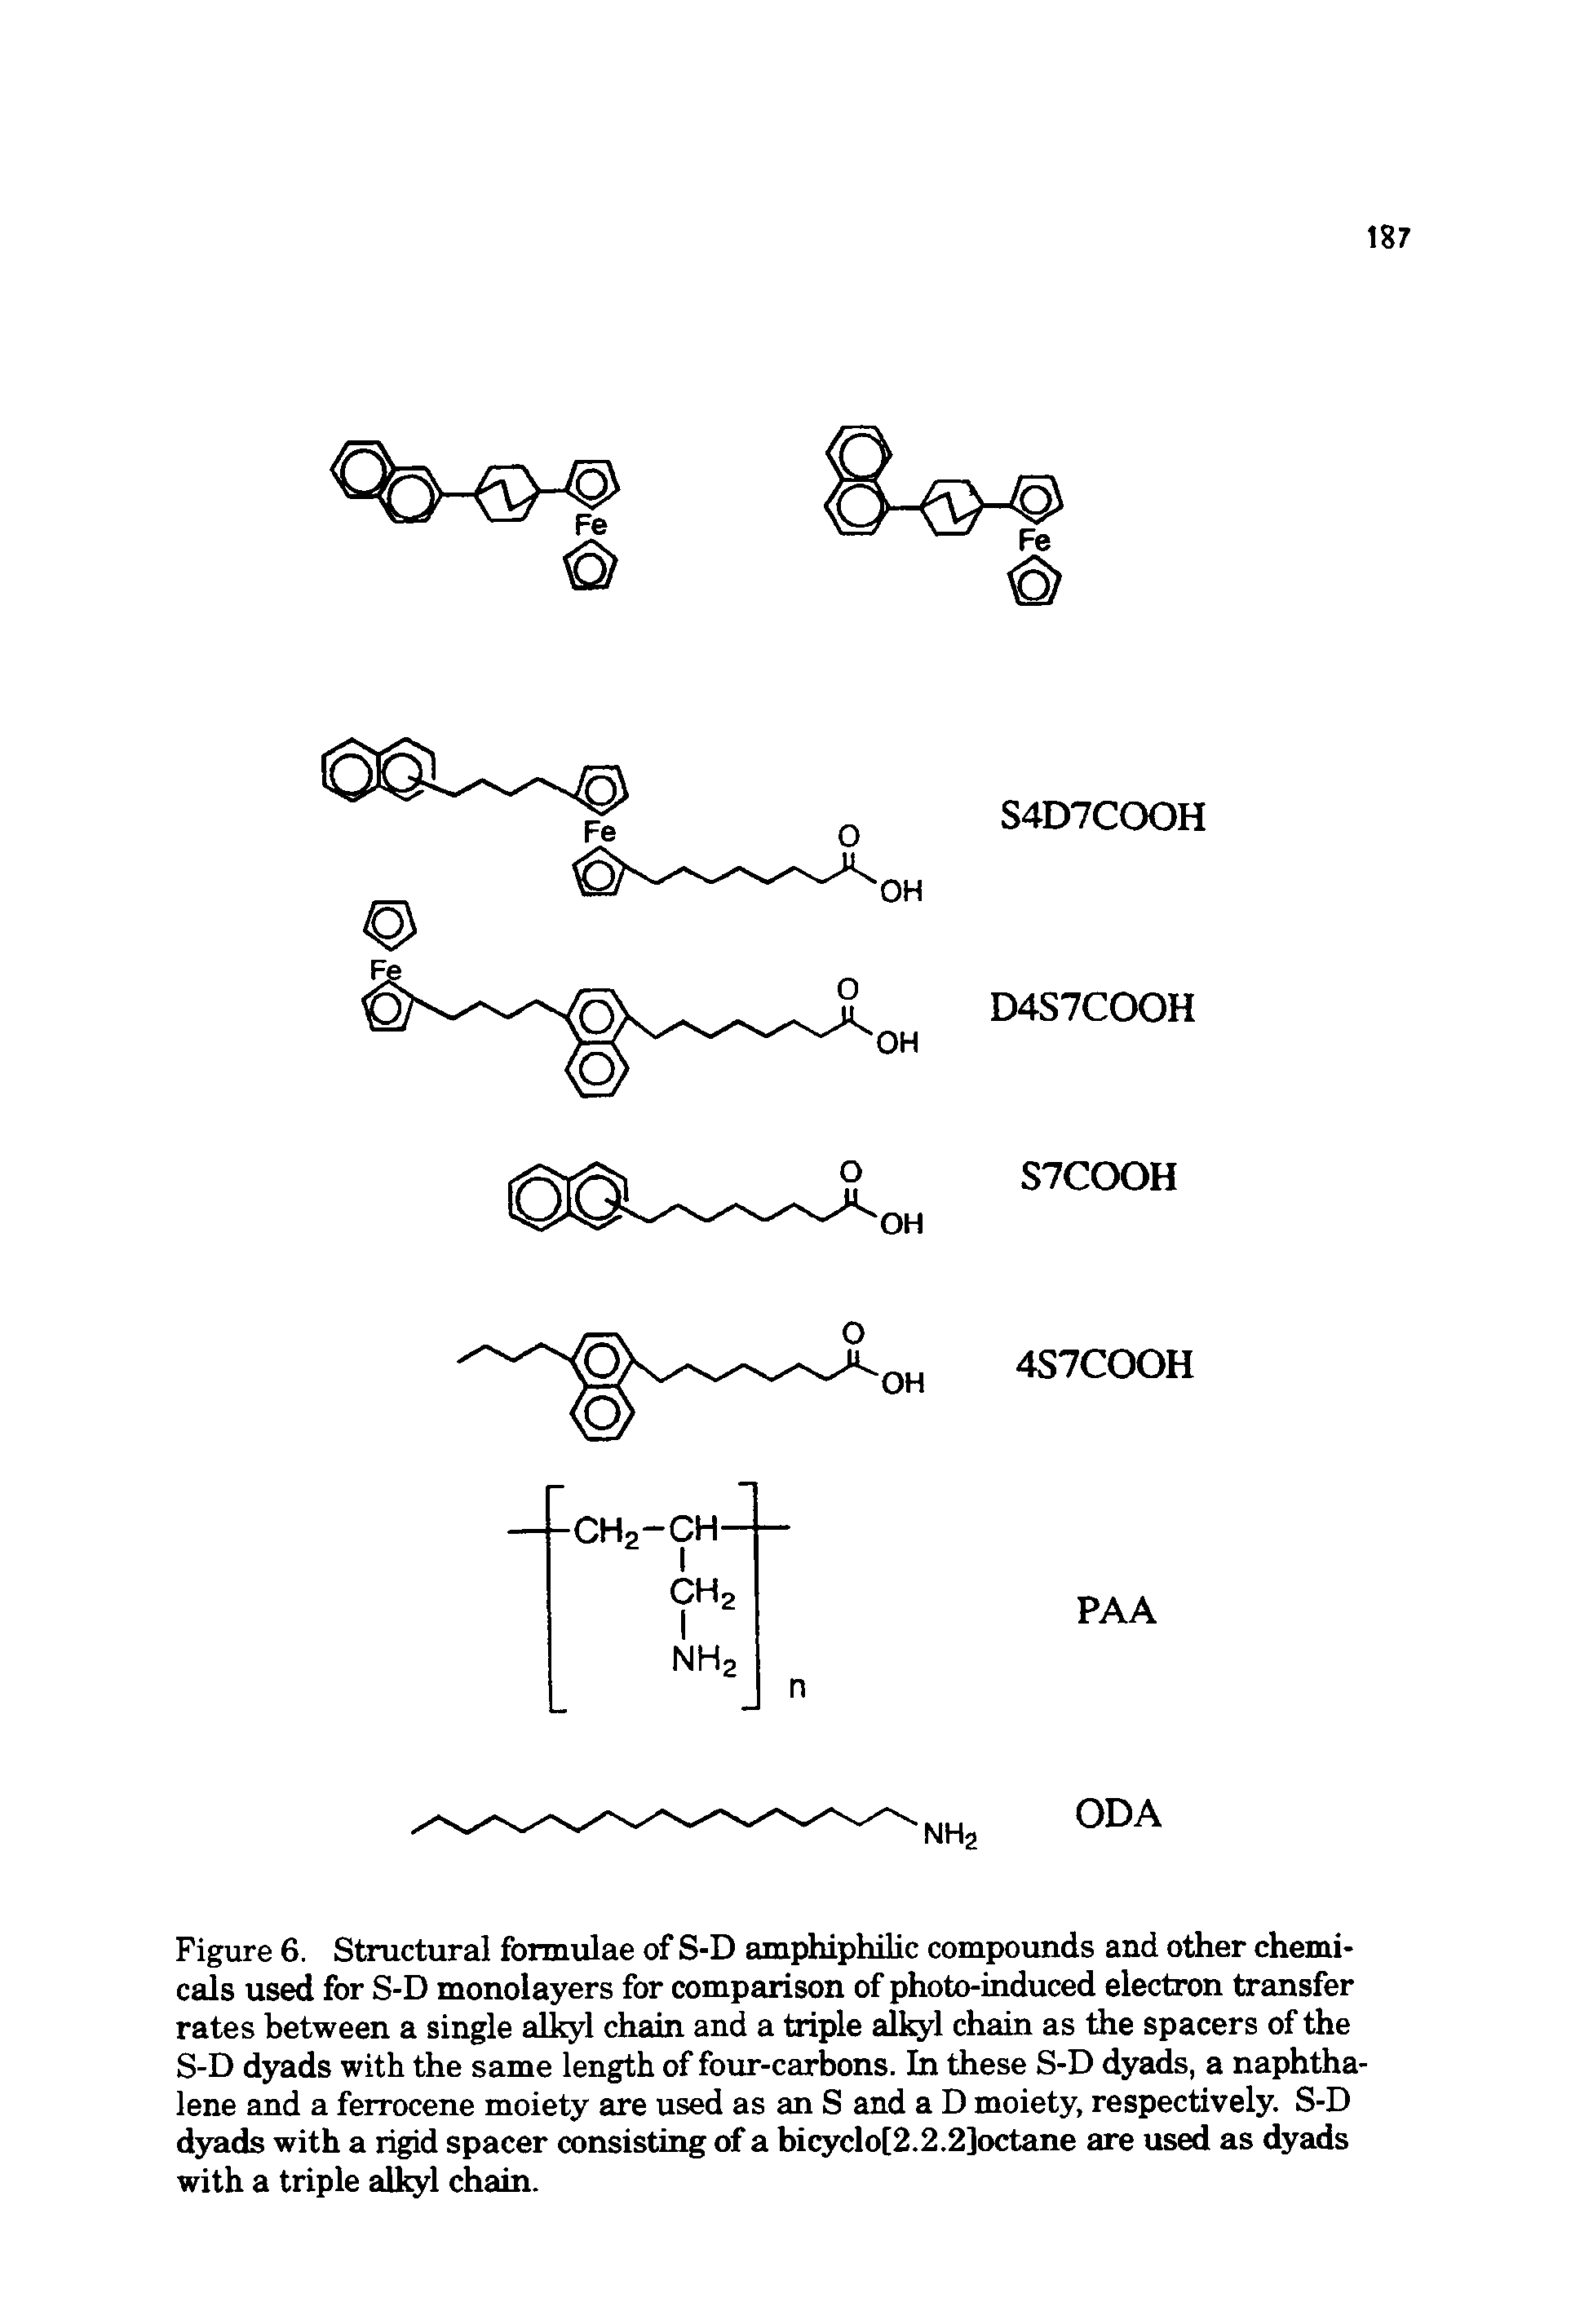 Figure 6. Structural formulae of S-D amphiphilic compounds and other chemicals used for S-D monolayers for comparison of photo-induced electron transfer rates between a single alkyl chain and a triple alkyl chain as the spacers of the S-D dyads with the same length of four-carbons. In these S-D dyads, a naphthalene and a ferrocene moiety are used as an S and a D moiety, respectively. S-D dyads with a rigid spacer consisting of a bicyclo[2.2.2]octane are used as dyads with a triple alkyl chain.